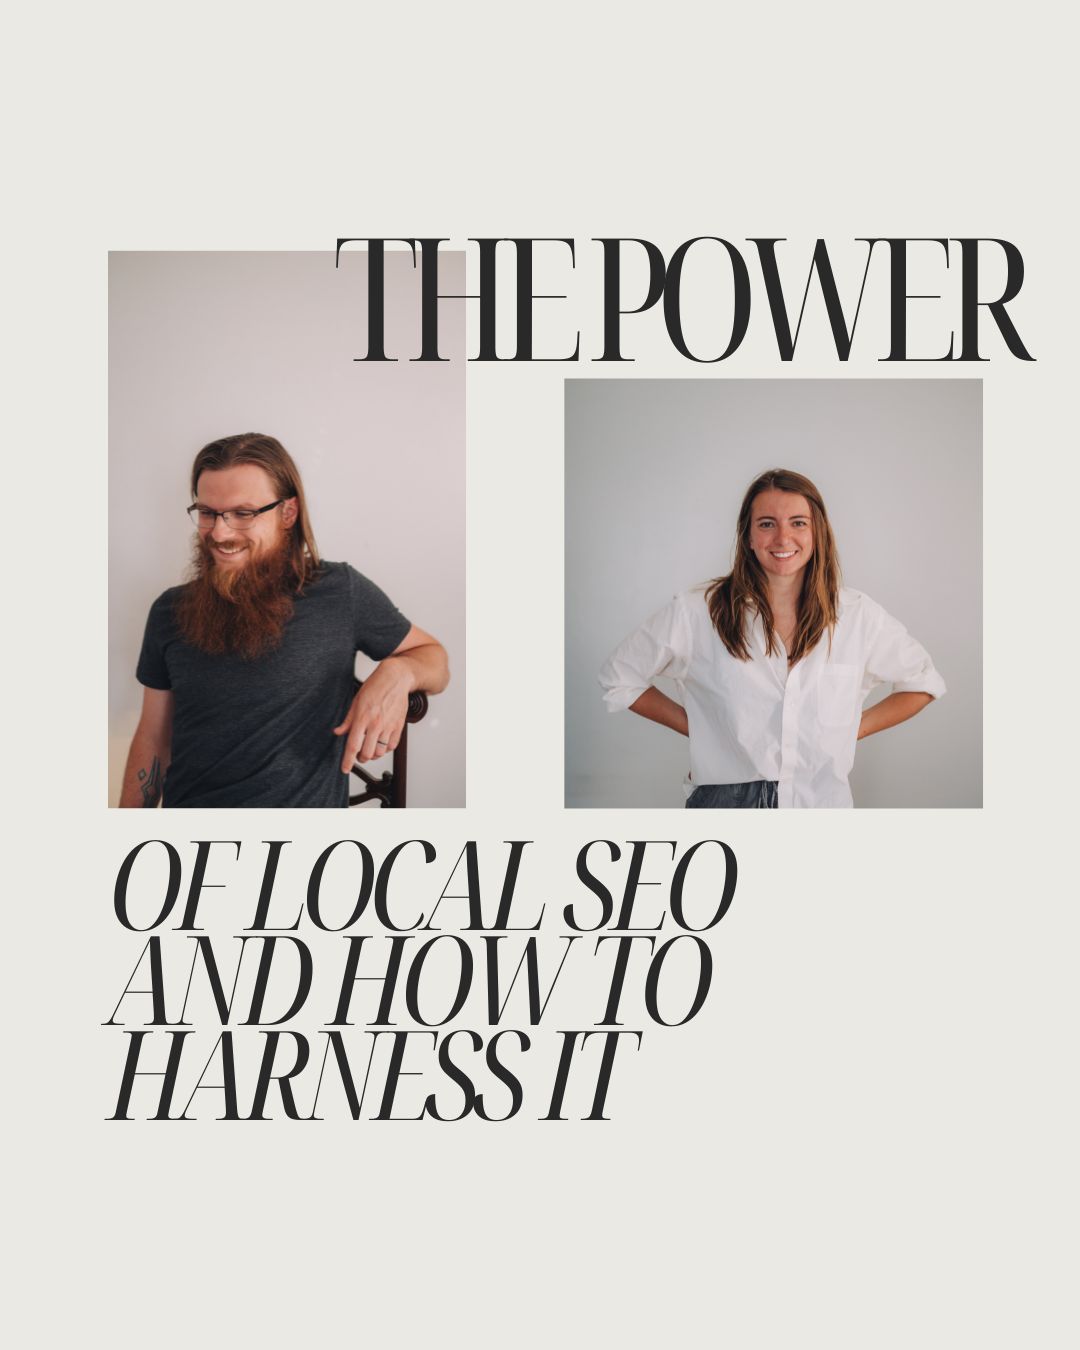 An image of a man and an image of a woman are on a beige background, the text reads" The Power of Local SEO and how to harness it" for an article about local SEO and Google My Business